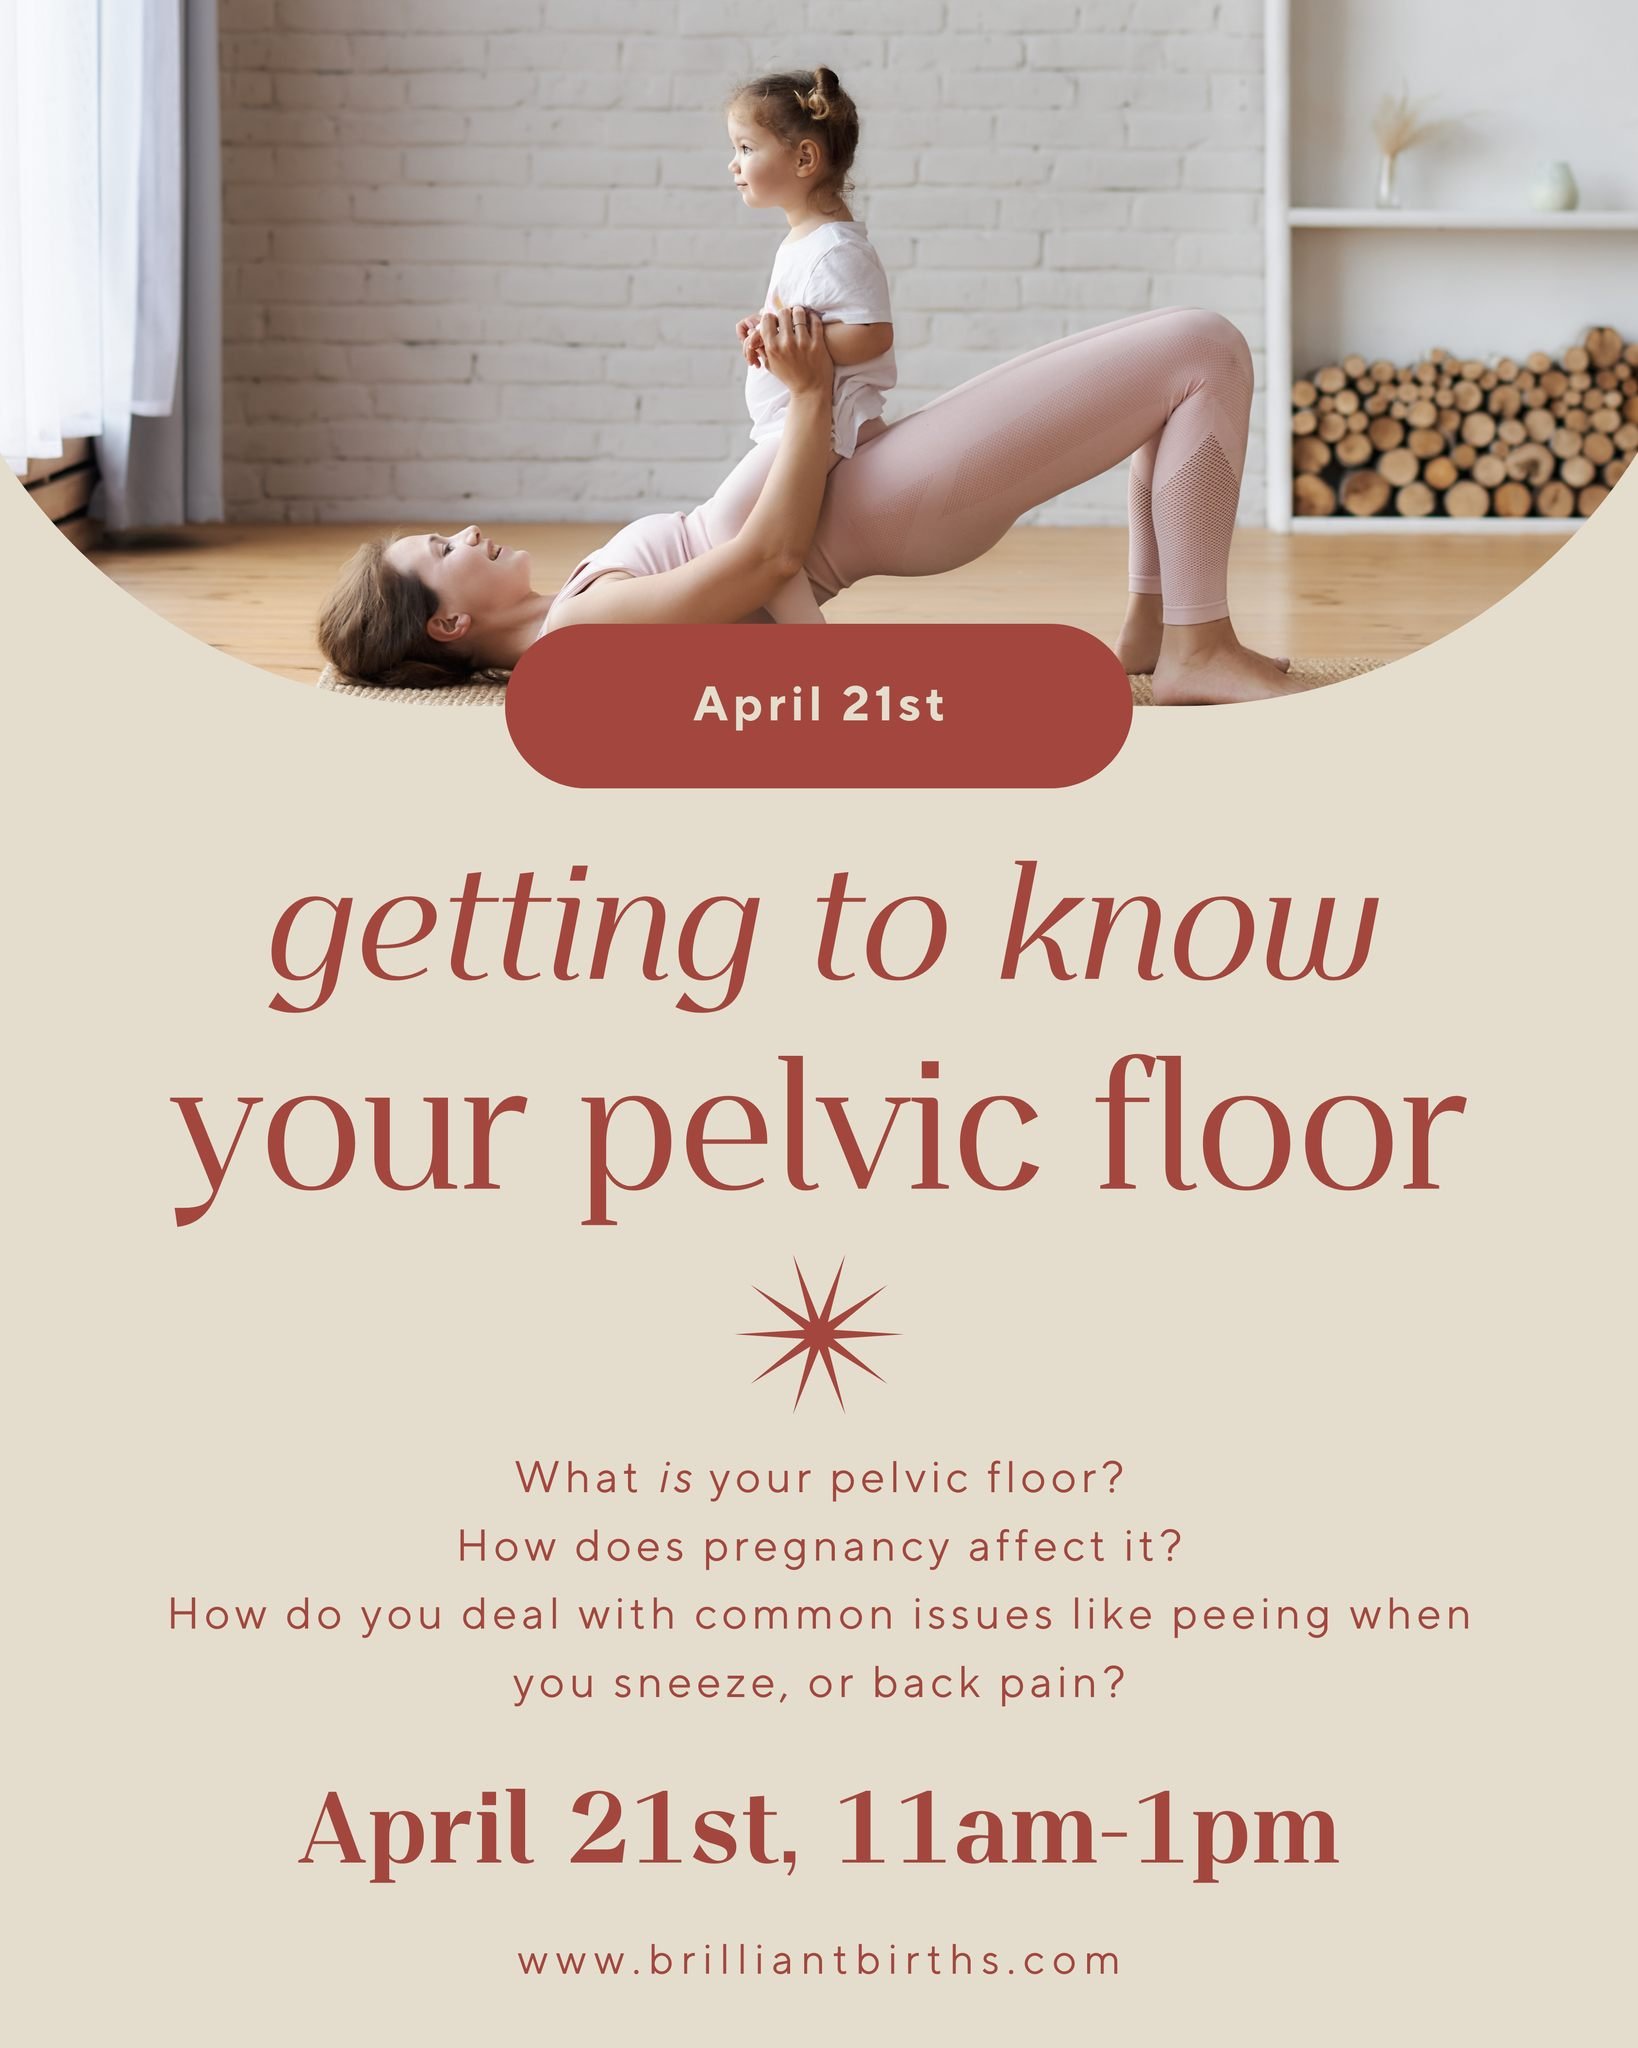 A special workshop by Pelvic Physical Therapist Molly Durigan! Prenatal or postpartum, Molly will answer all your questions about pelvic floor health. Learn what to expect, demystify your own experience, and hear from an expert about what pelvic floo